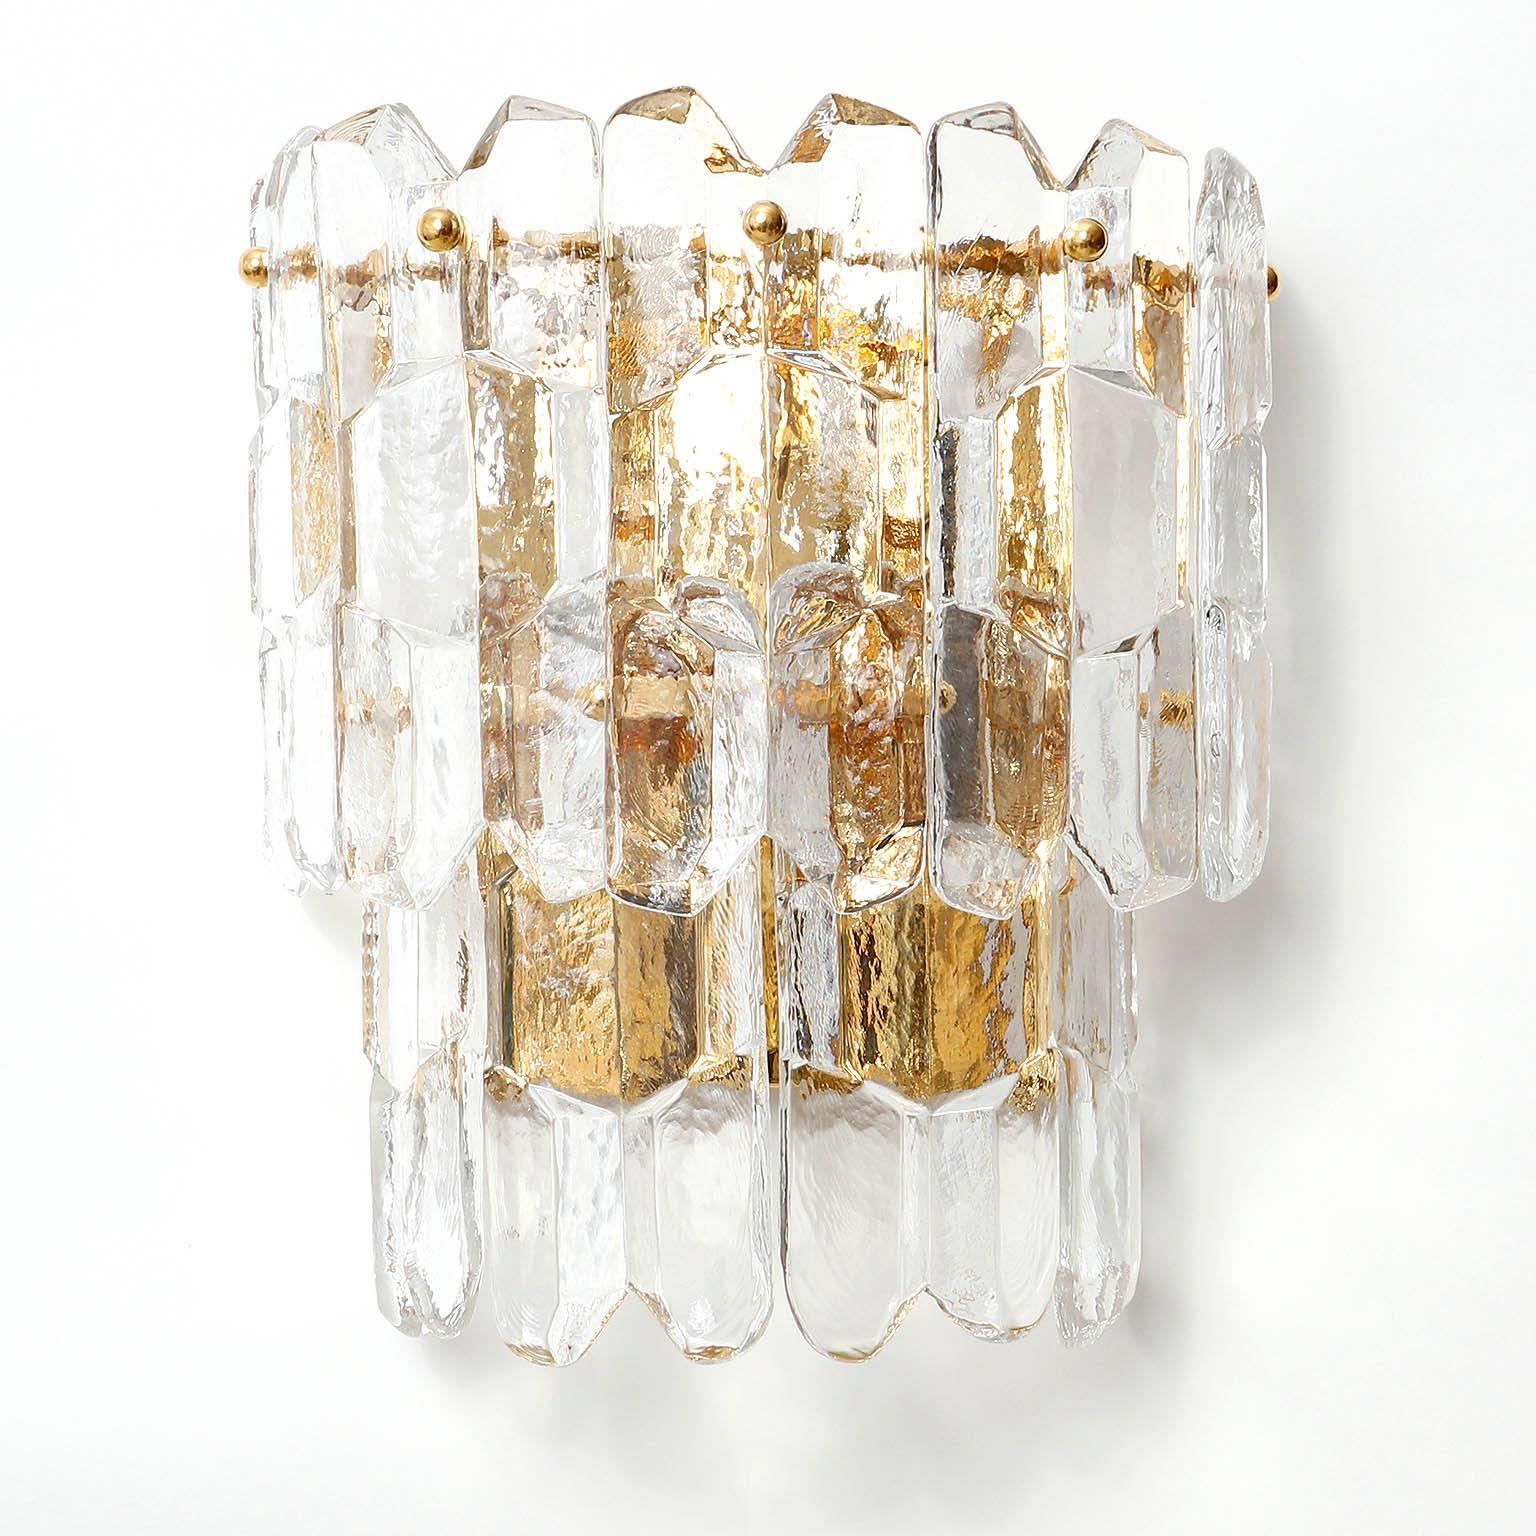 A pair of very exquisite 24-carat gold-plated brass and clear brilliant glass 'Palazzo' wall lights by J.T. Kalmar, Vienna, Austria, manufactured in circa 1970 (late 1960s and early 1970s).
These large Hollywood regency lamps are handmade and high